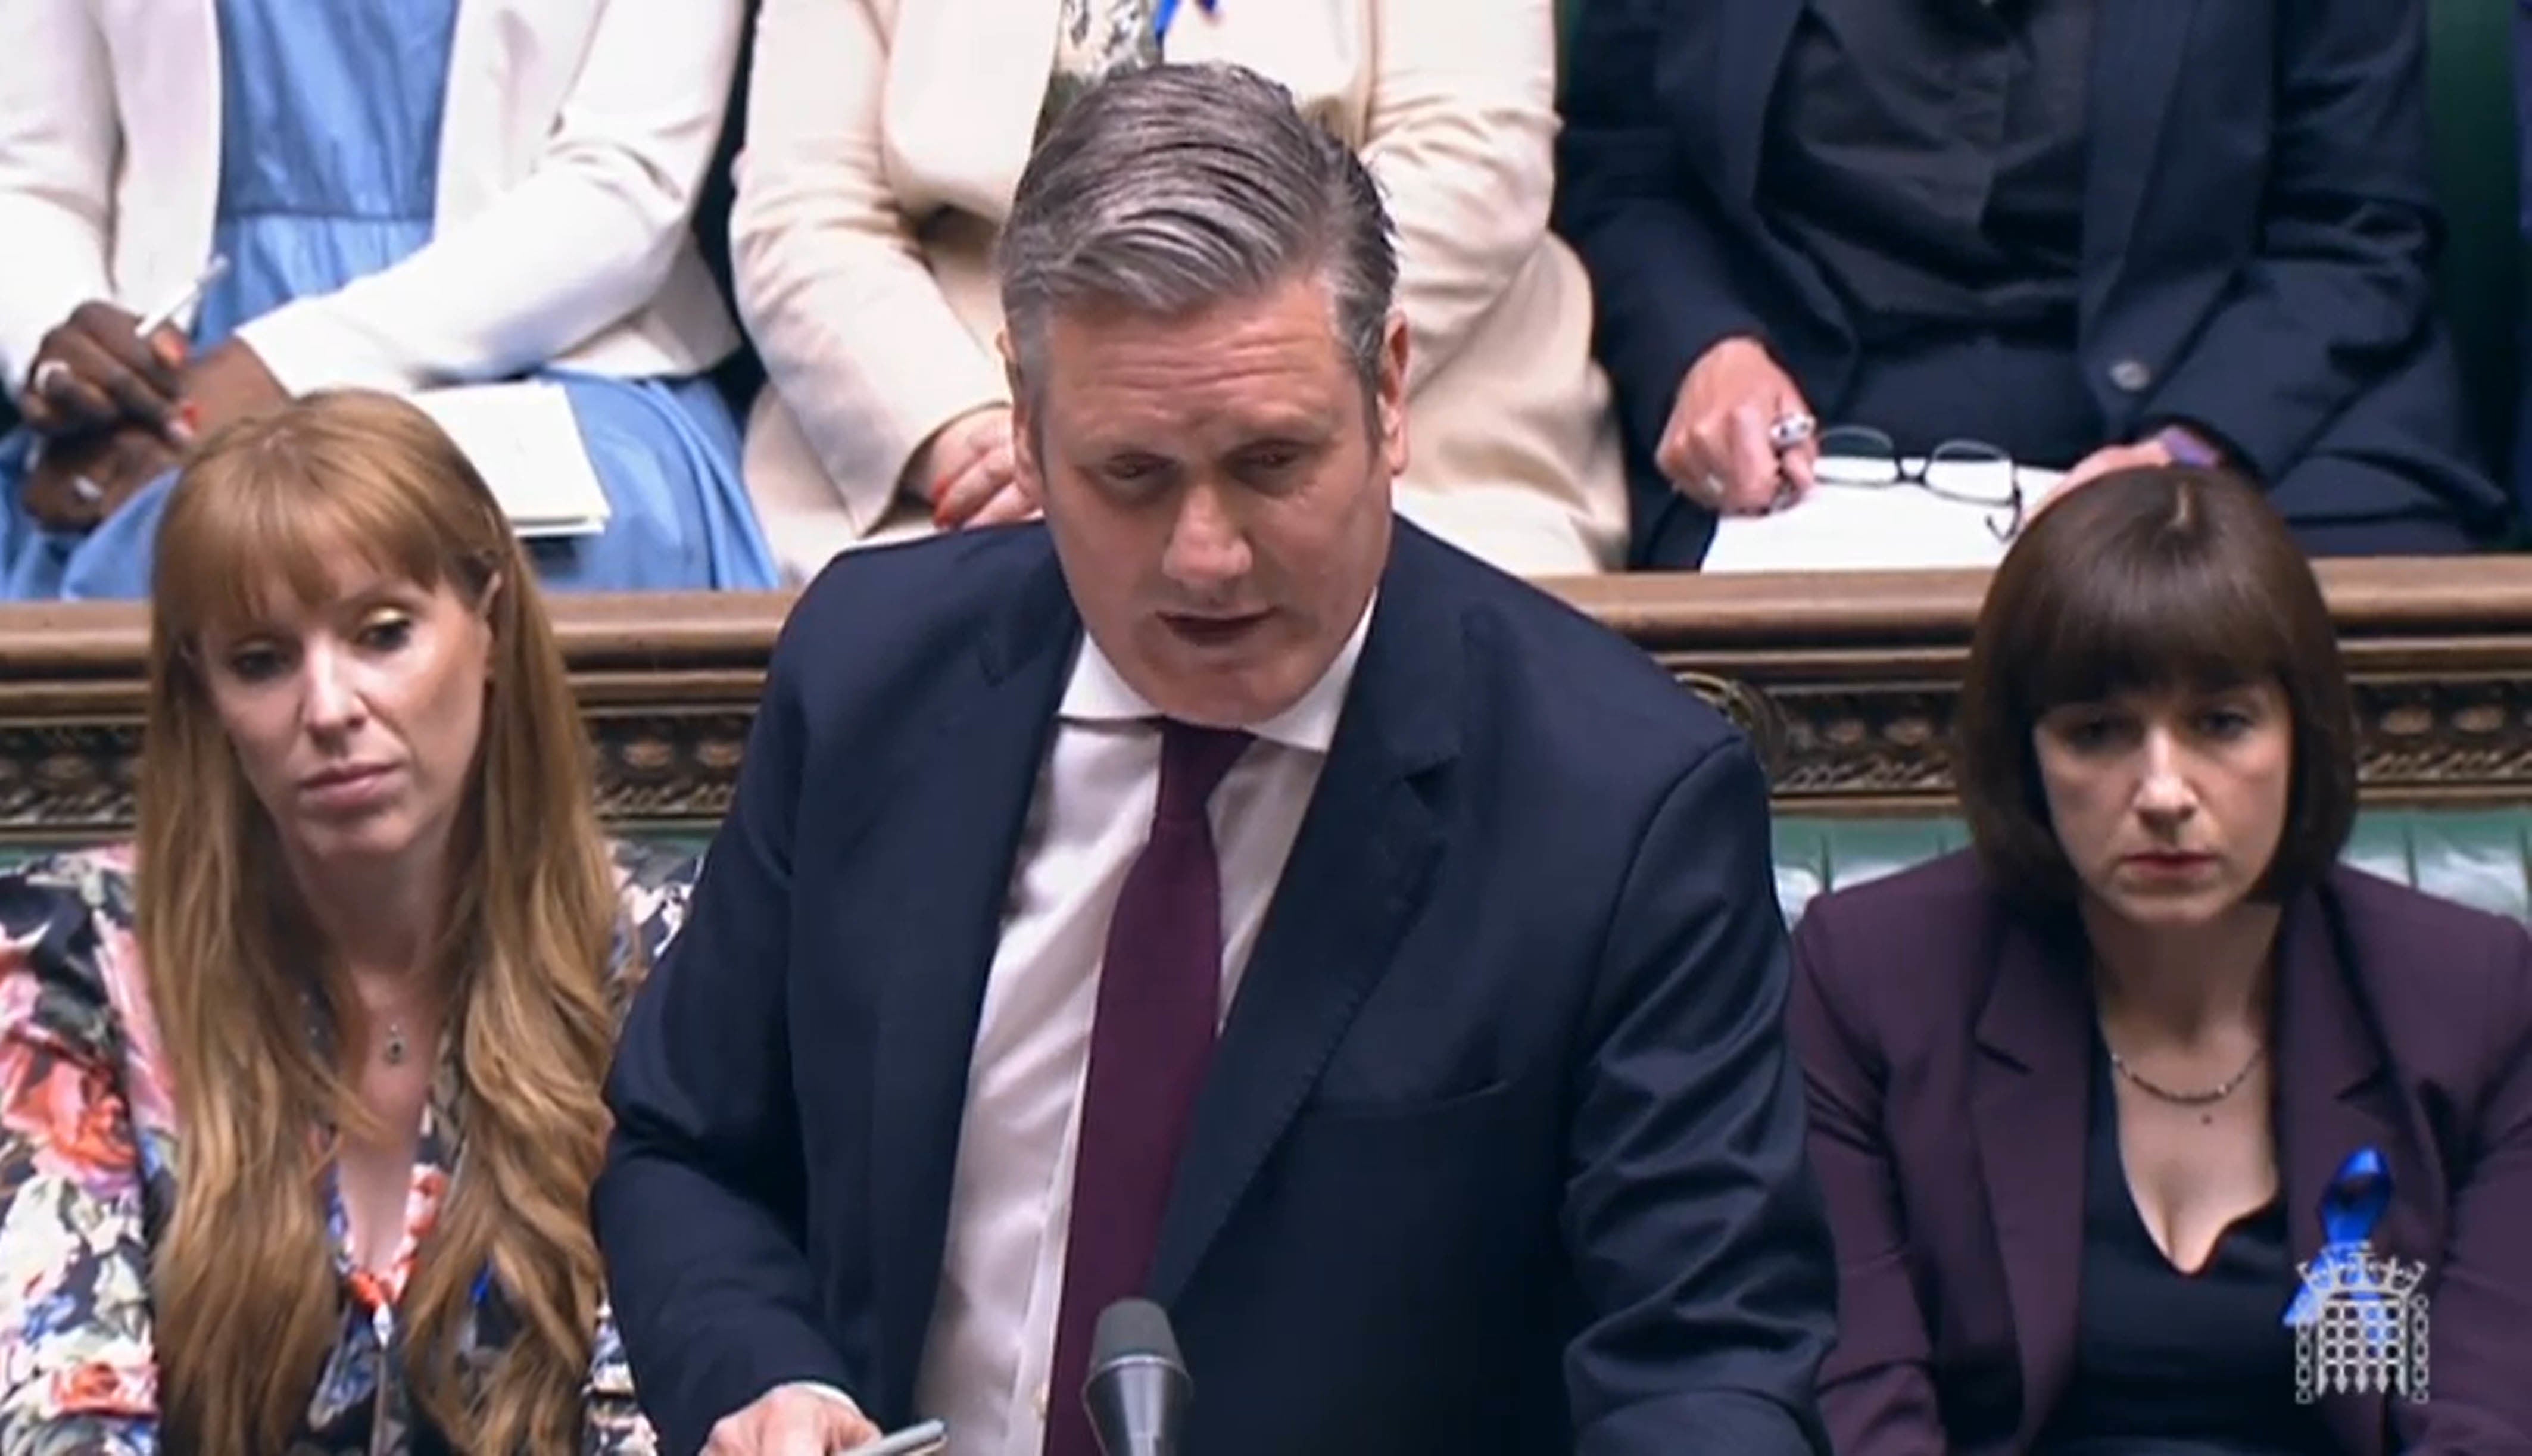 It was too late. Keir Starmer had won the moment in the chamber